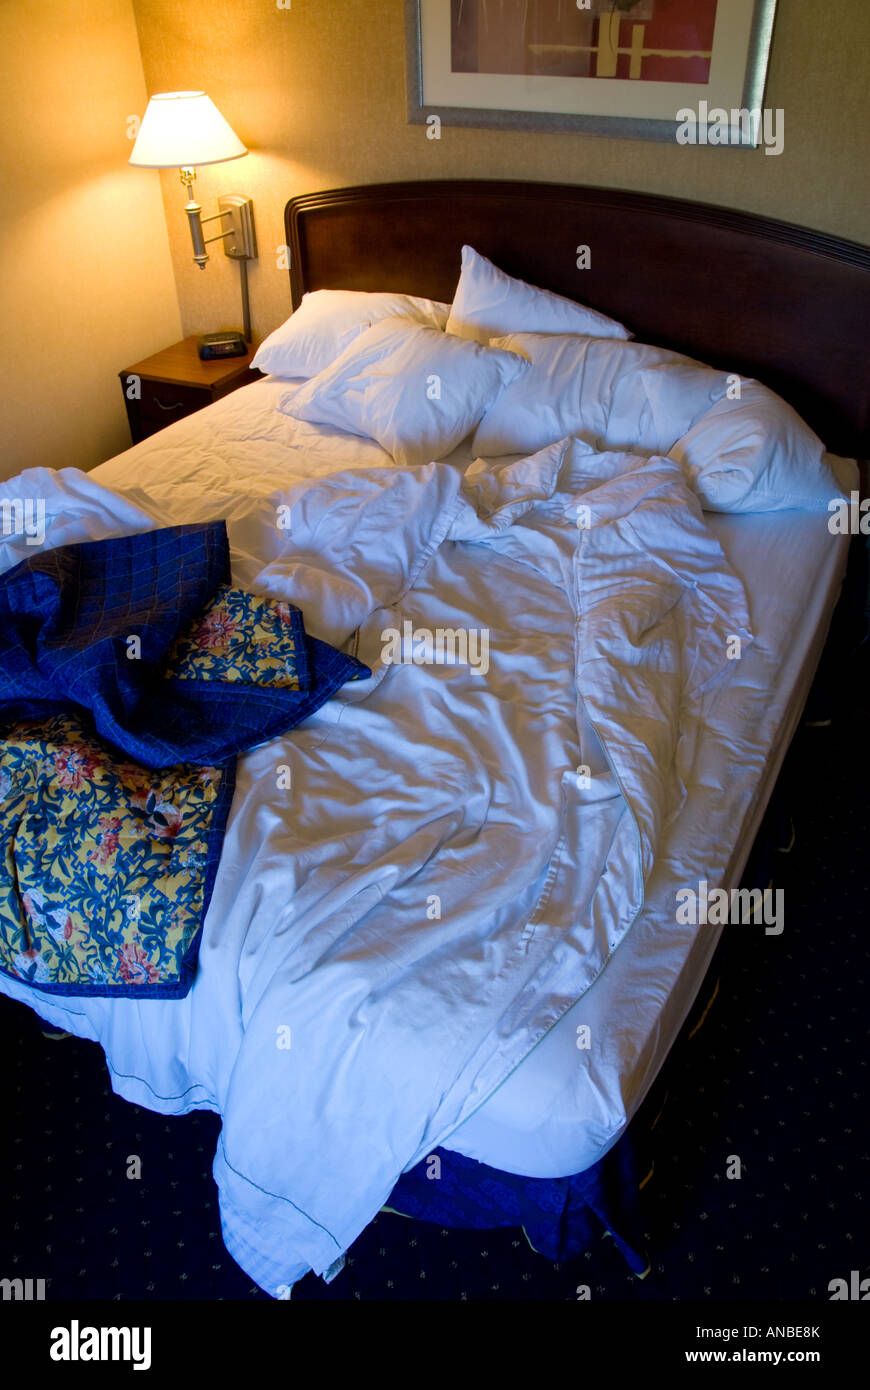 High Angle View Of Unmade King Sized Hotel Room Bed With